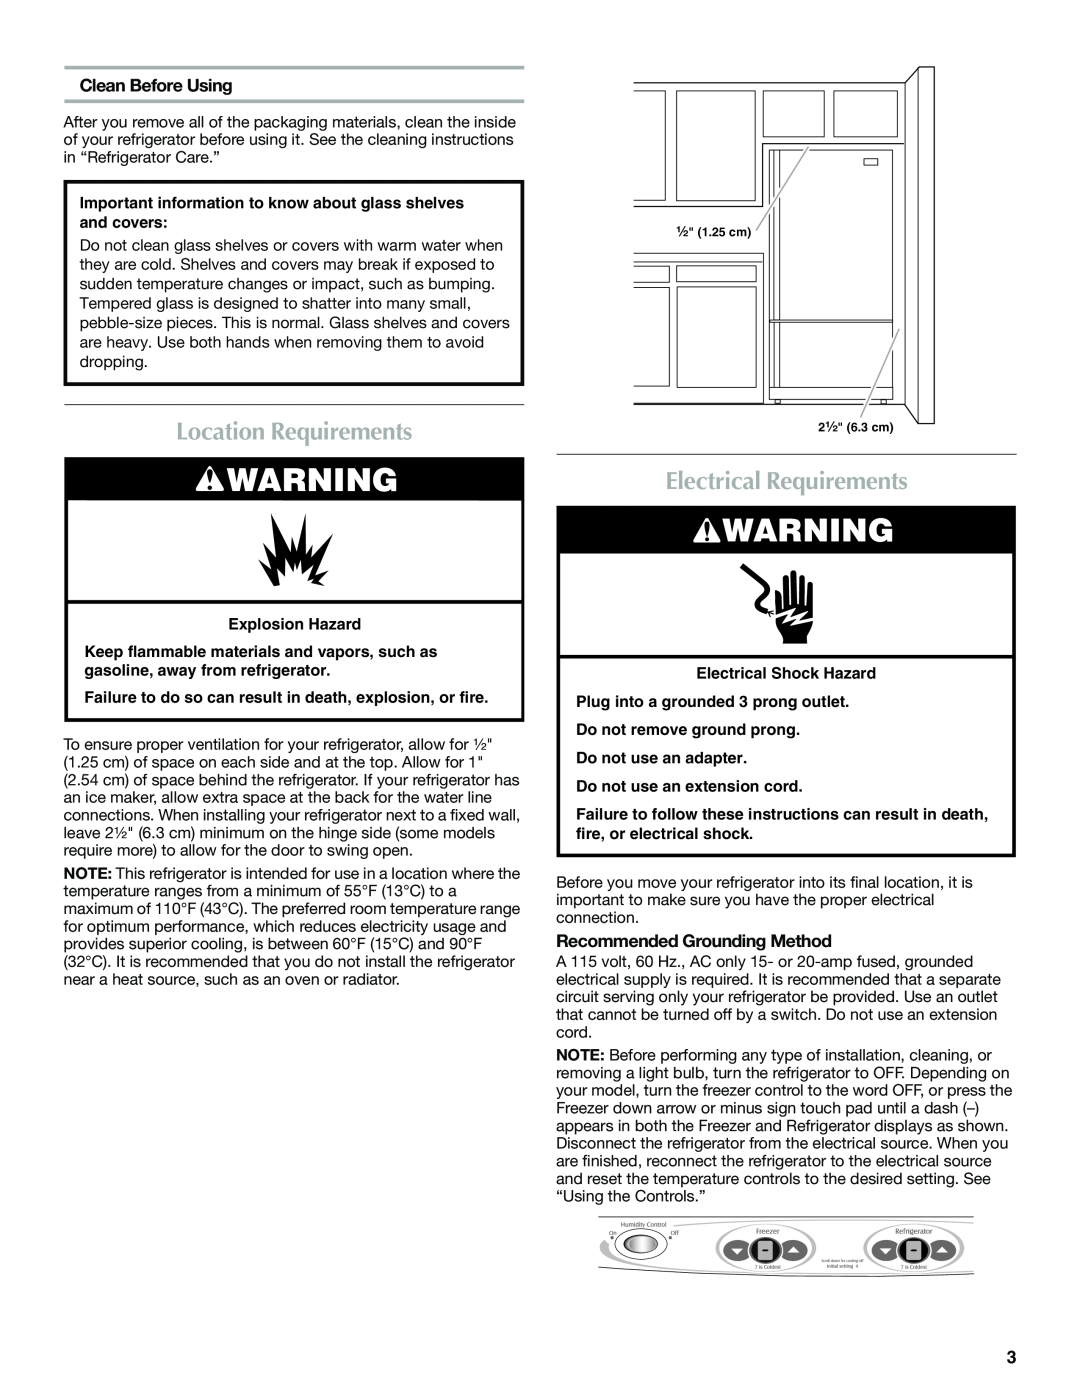 Maytag W10366206A Location Requirements, Electrical Requirements, Clean Before Using, Recommended Grounding Method 